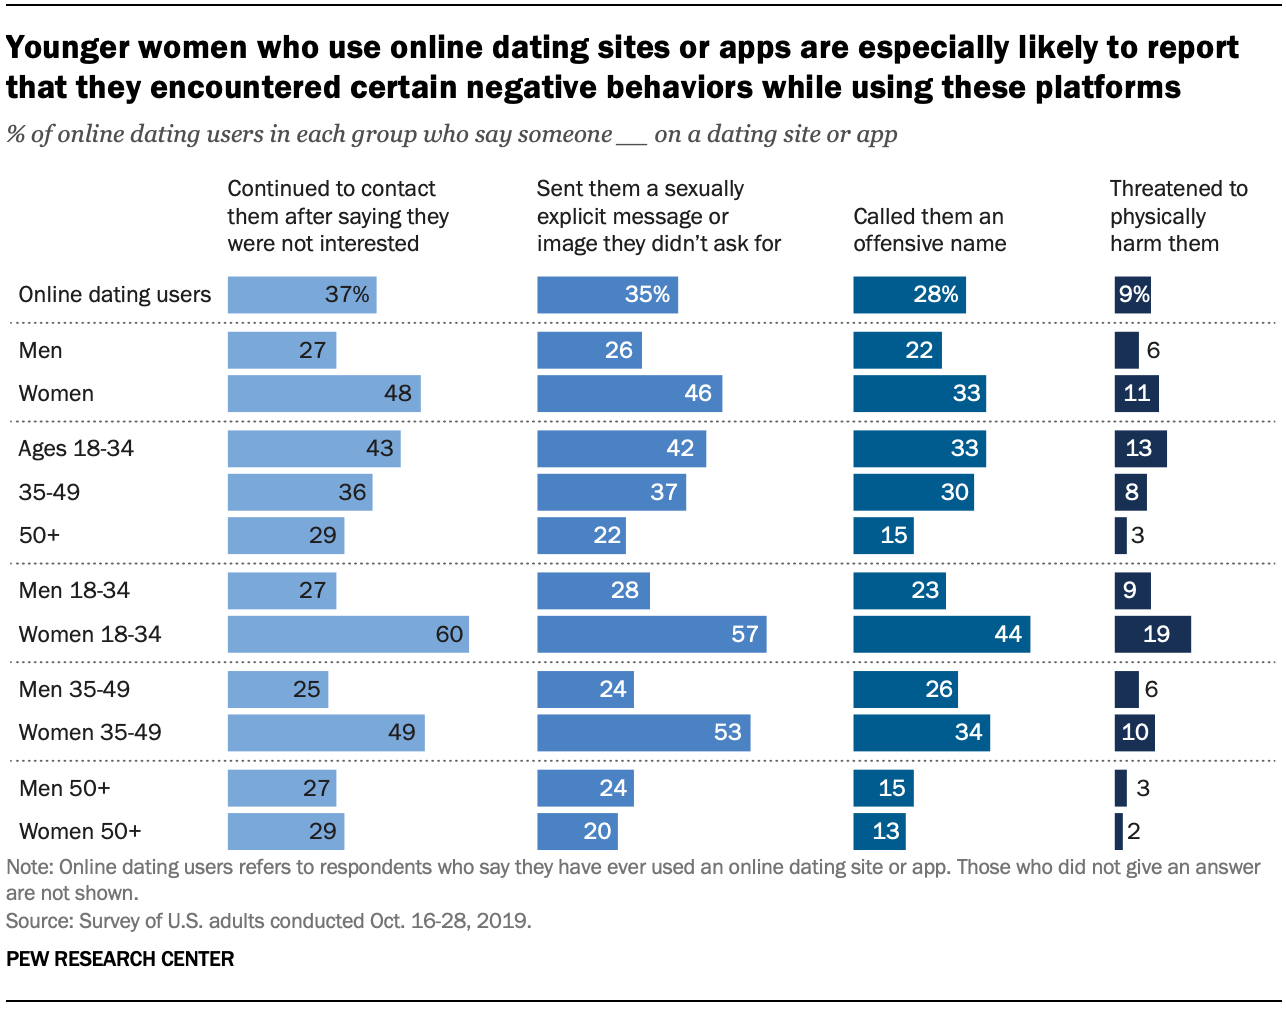 Chart shows younger women who use online dating sites or apps are especially likely to report that they encountered certain negative behaviors while using these platforms